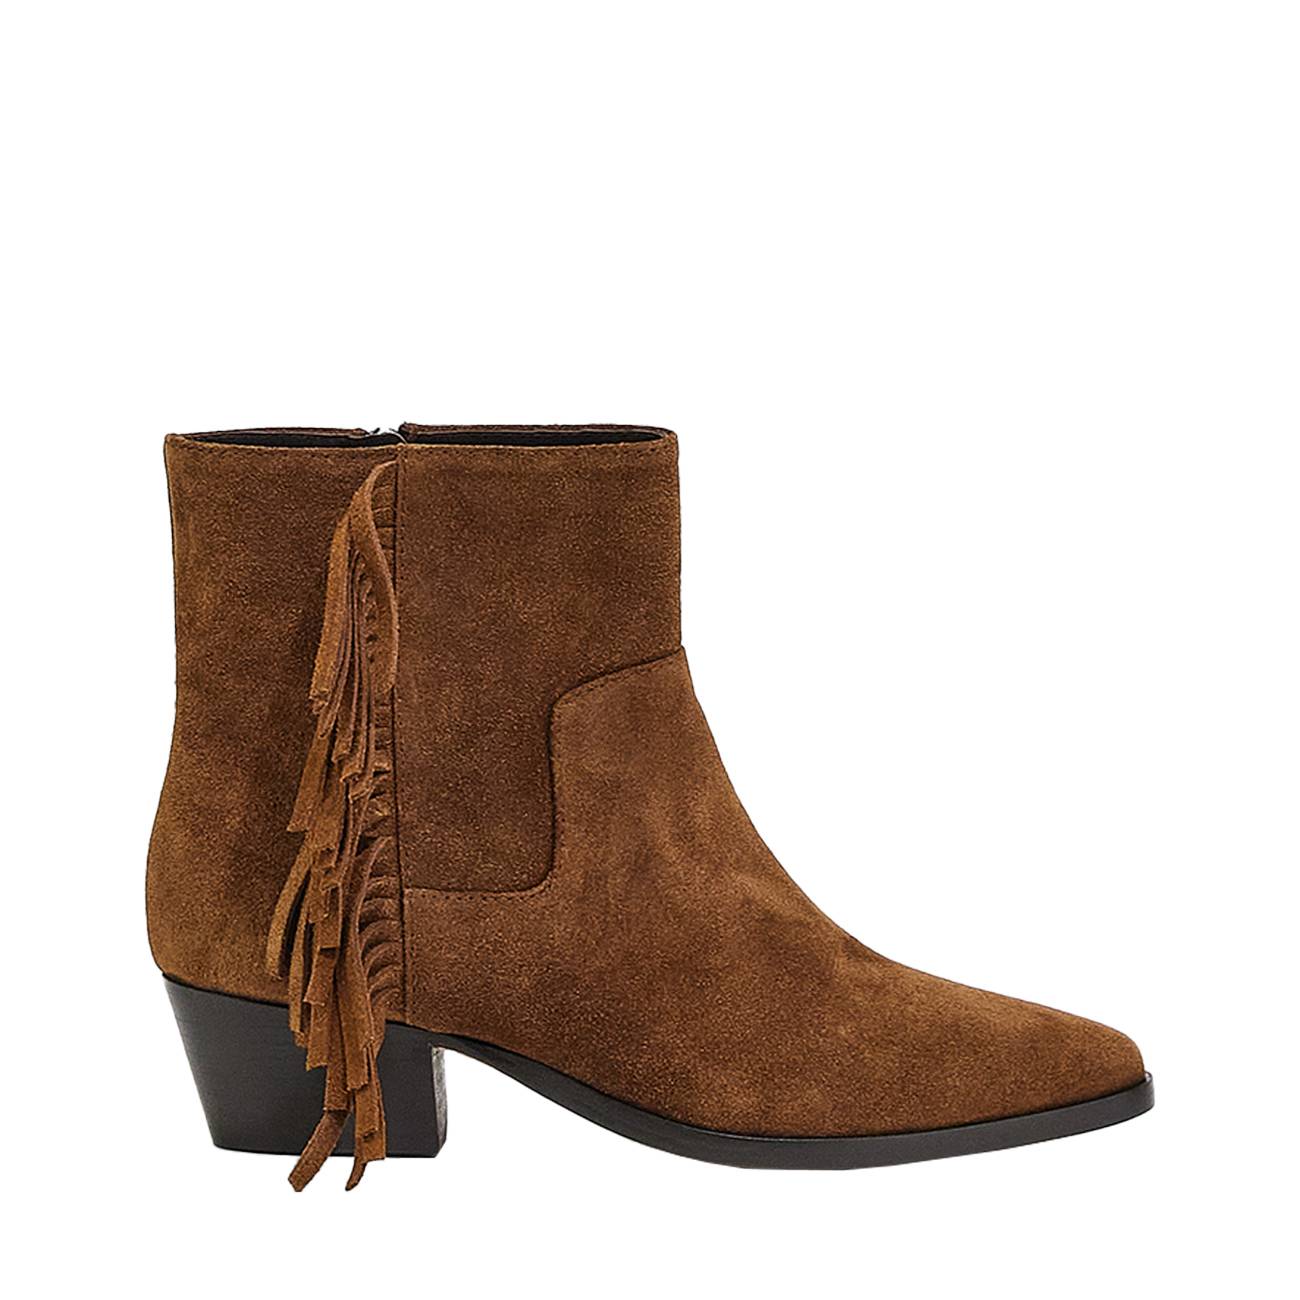 Suede leather ankle boots 36 bestvalue.eu